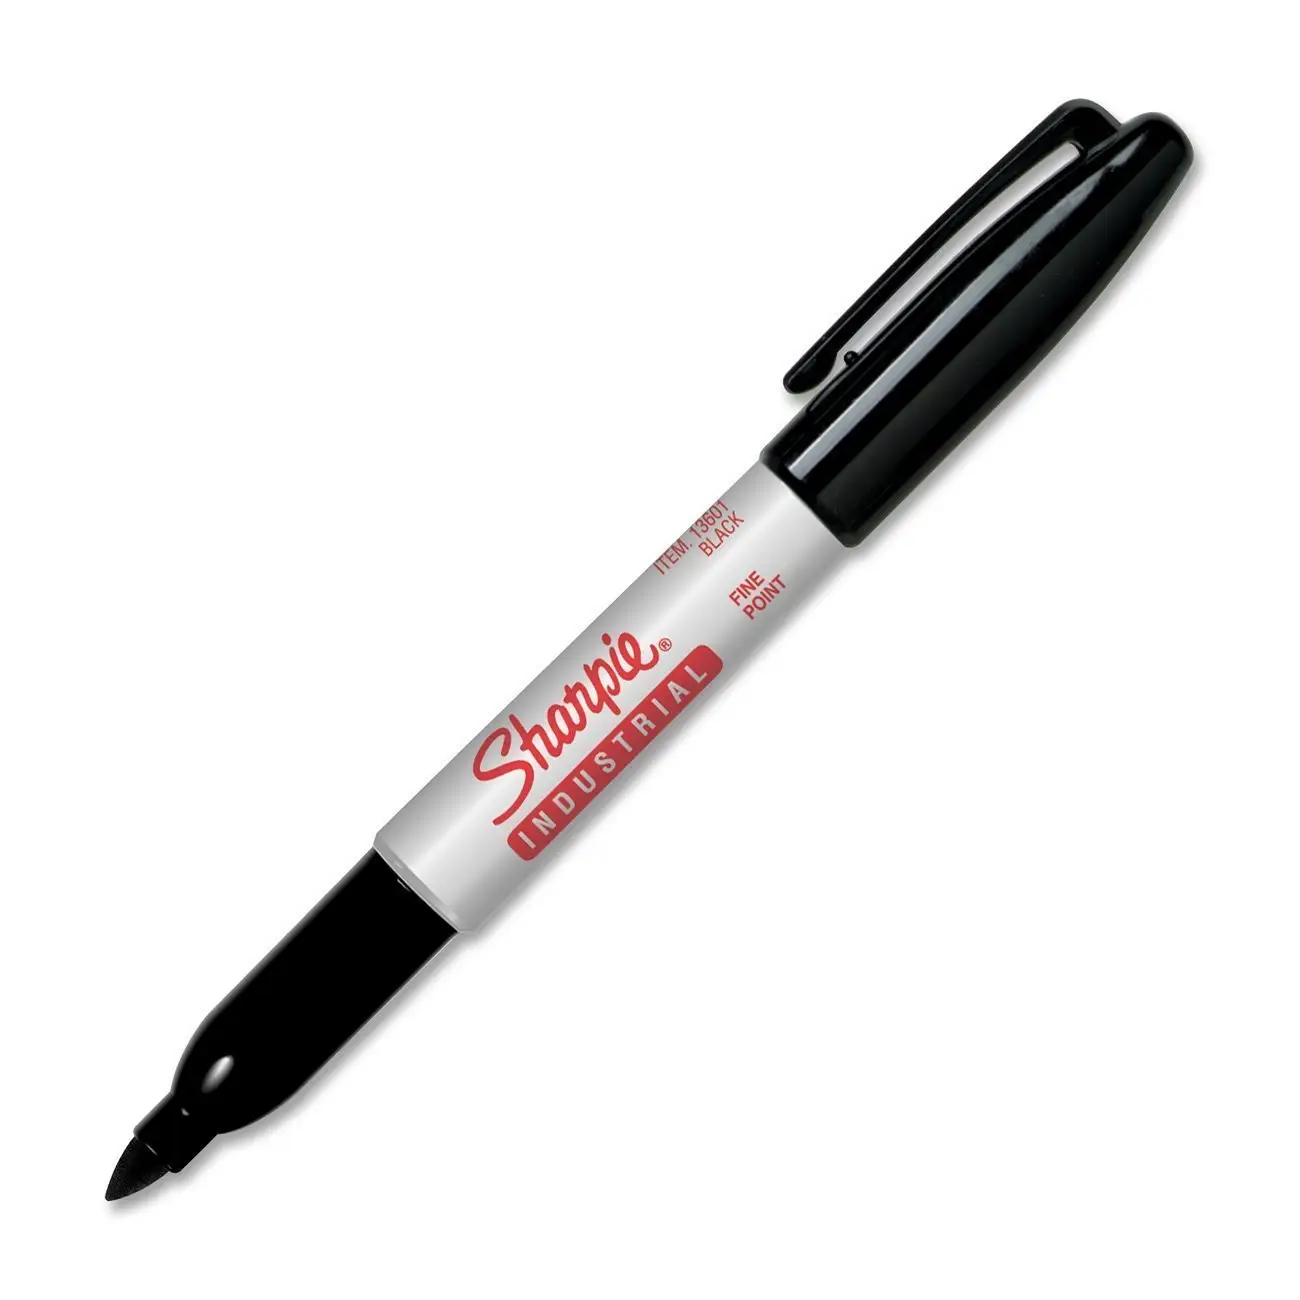 Wholesales sharpie industrial permanent marker 13601 high temperature 500f for industrial and lab marker 1.0mm